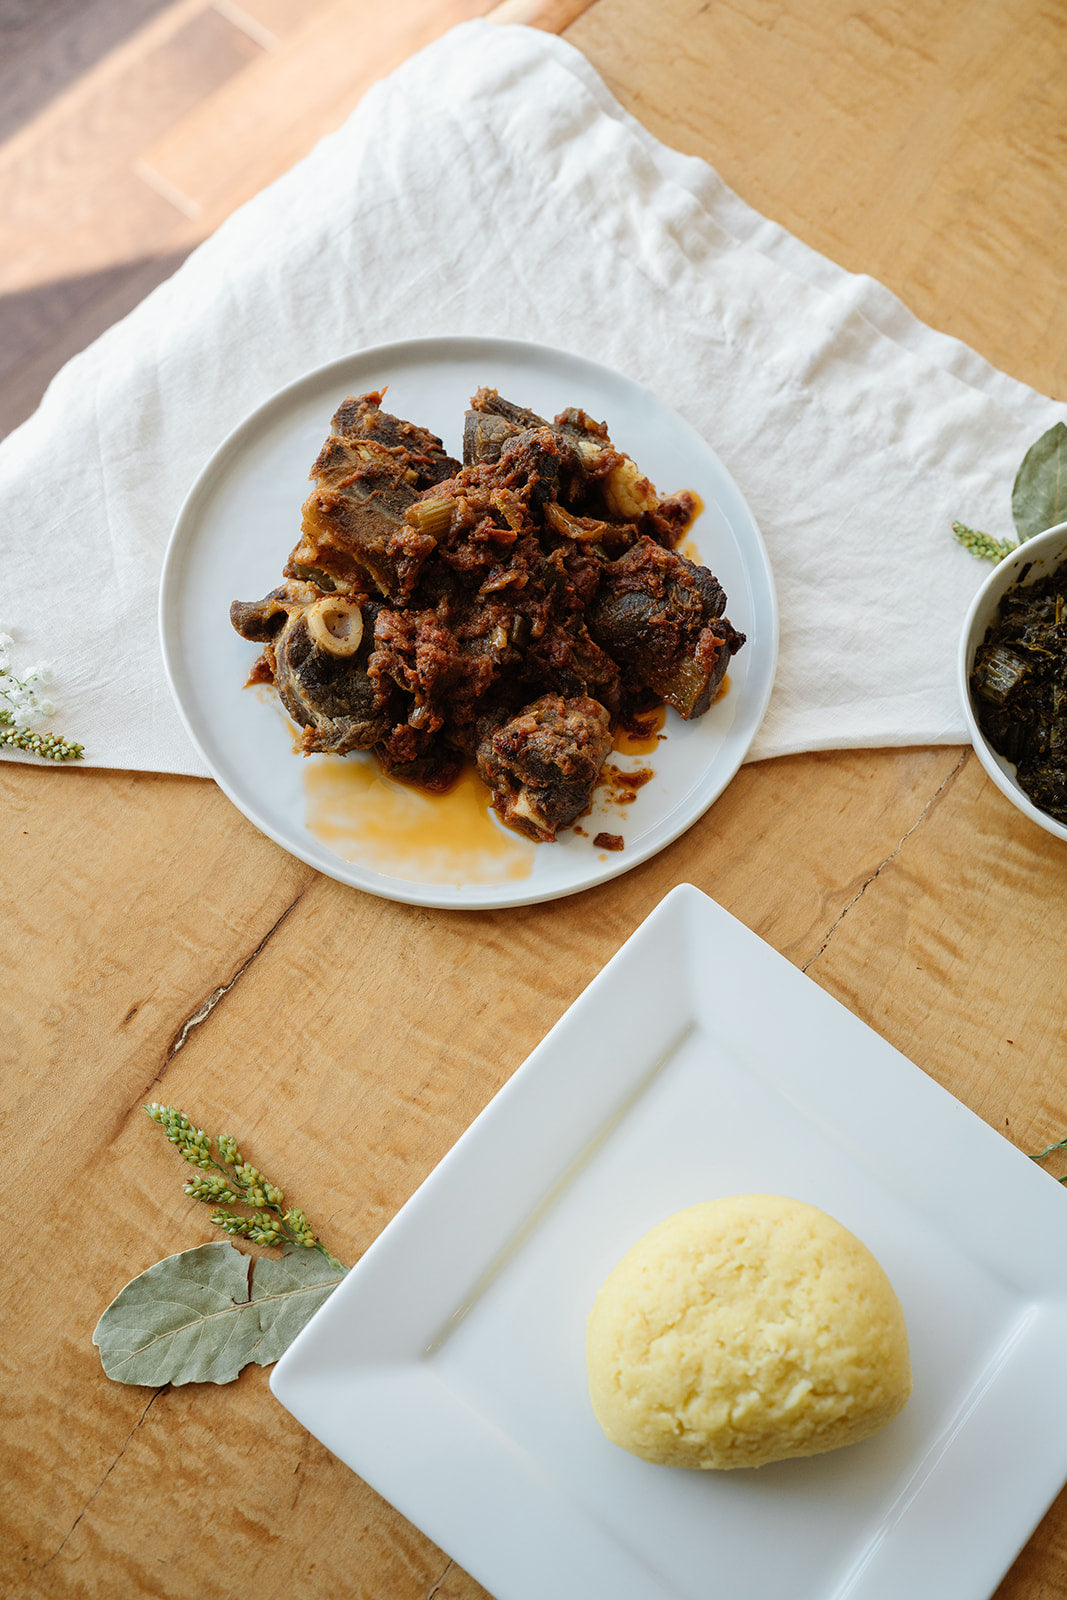 Goat Meat, Fufu, and Sombe Cooking Class:  Saturday, November 18th 3:30-6:00pm